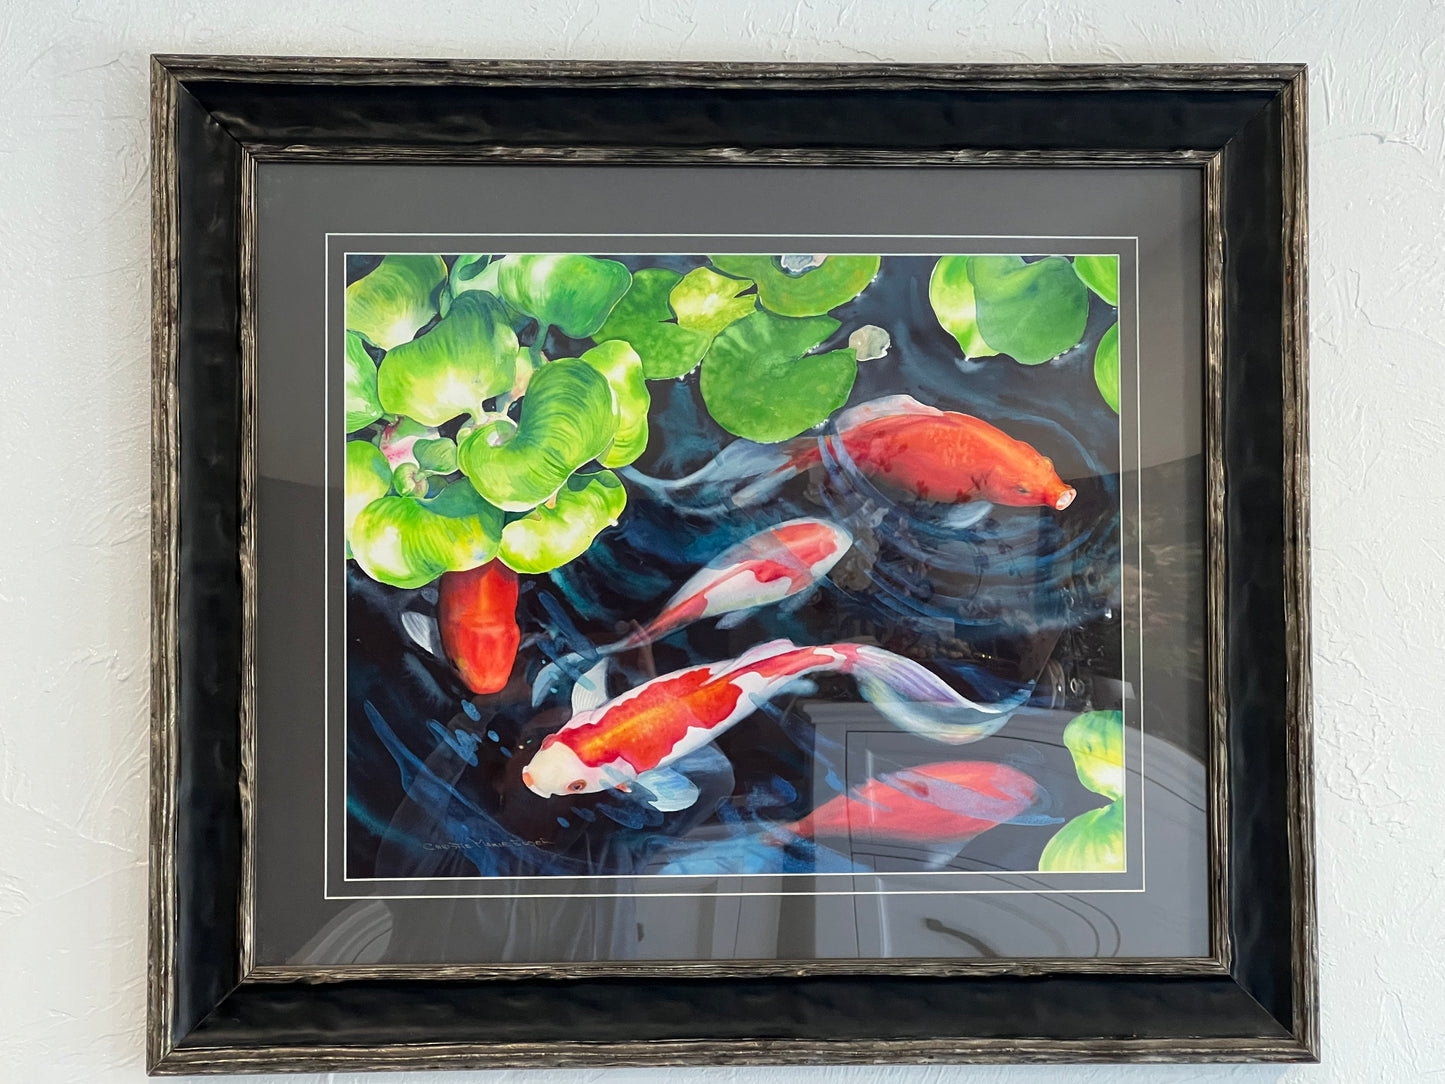 ORIGINAL WATERCOLOR Painting Koi Fish Pond Art, Nature Art, Gallery fine art by Artist Christie Marie E. Russell ©